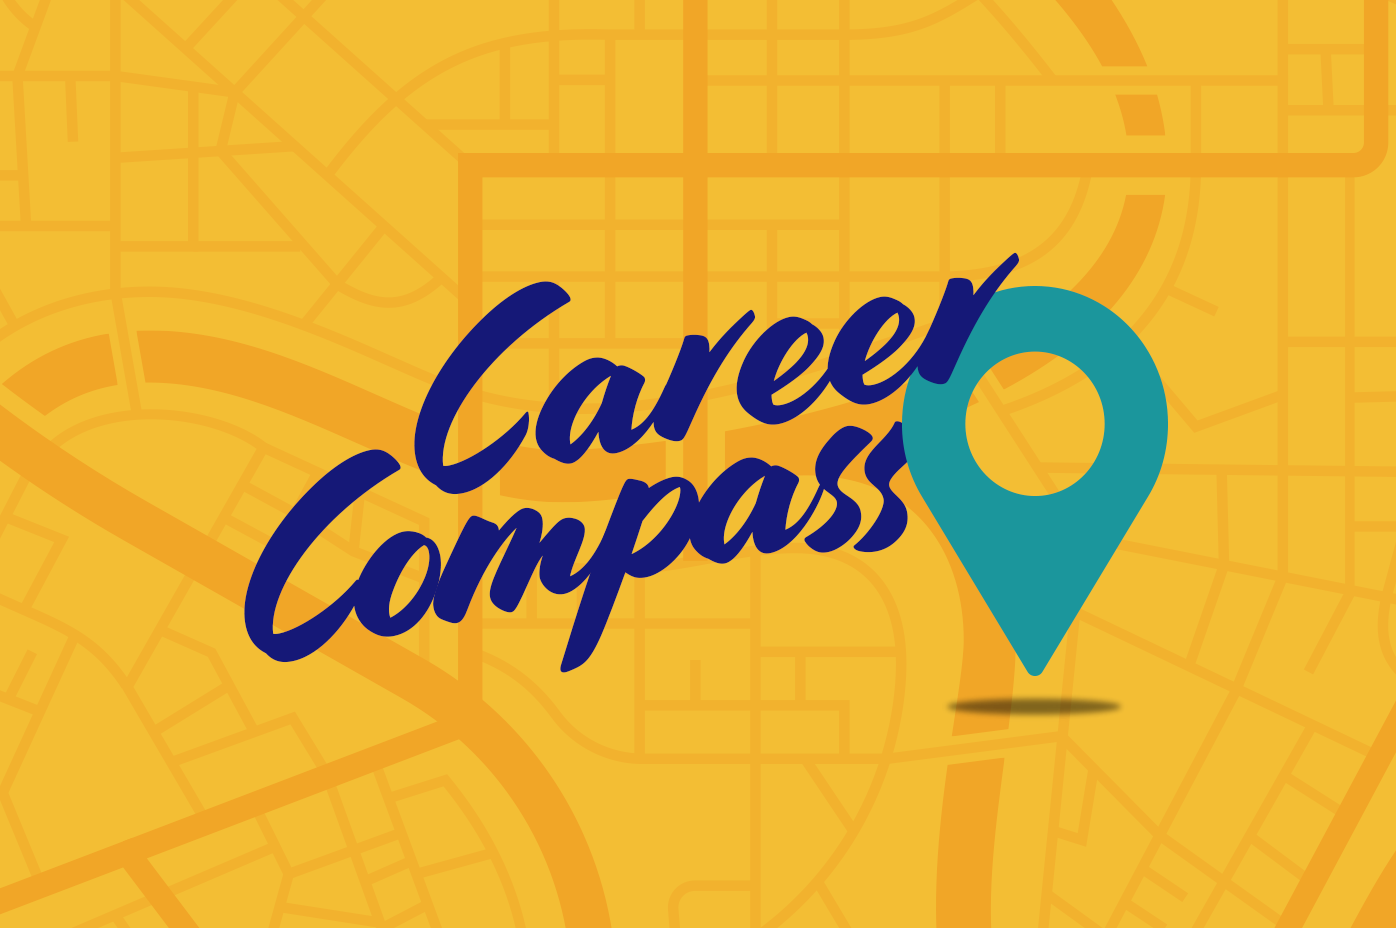 Career Compass Podcast: Future Leaders Moving Together Forward At Work